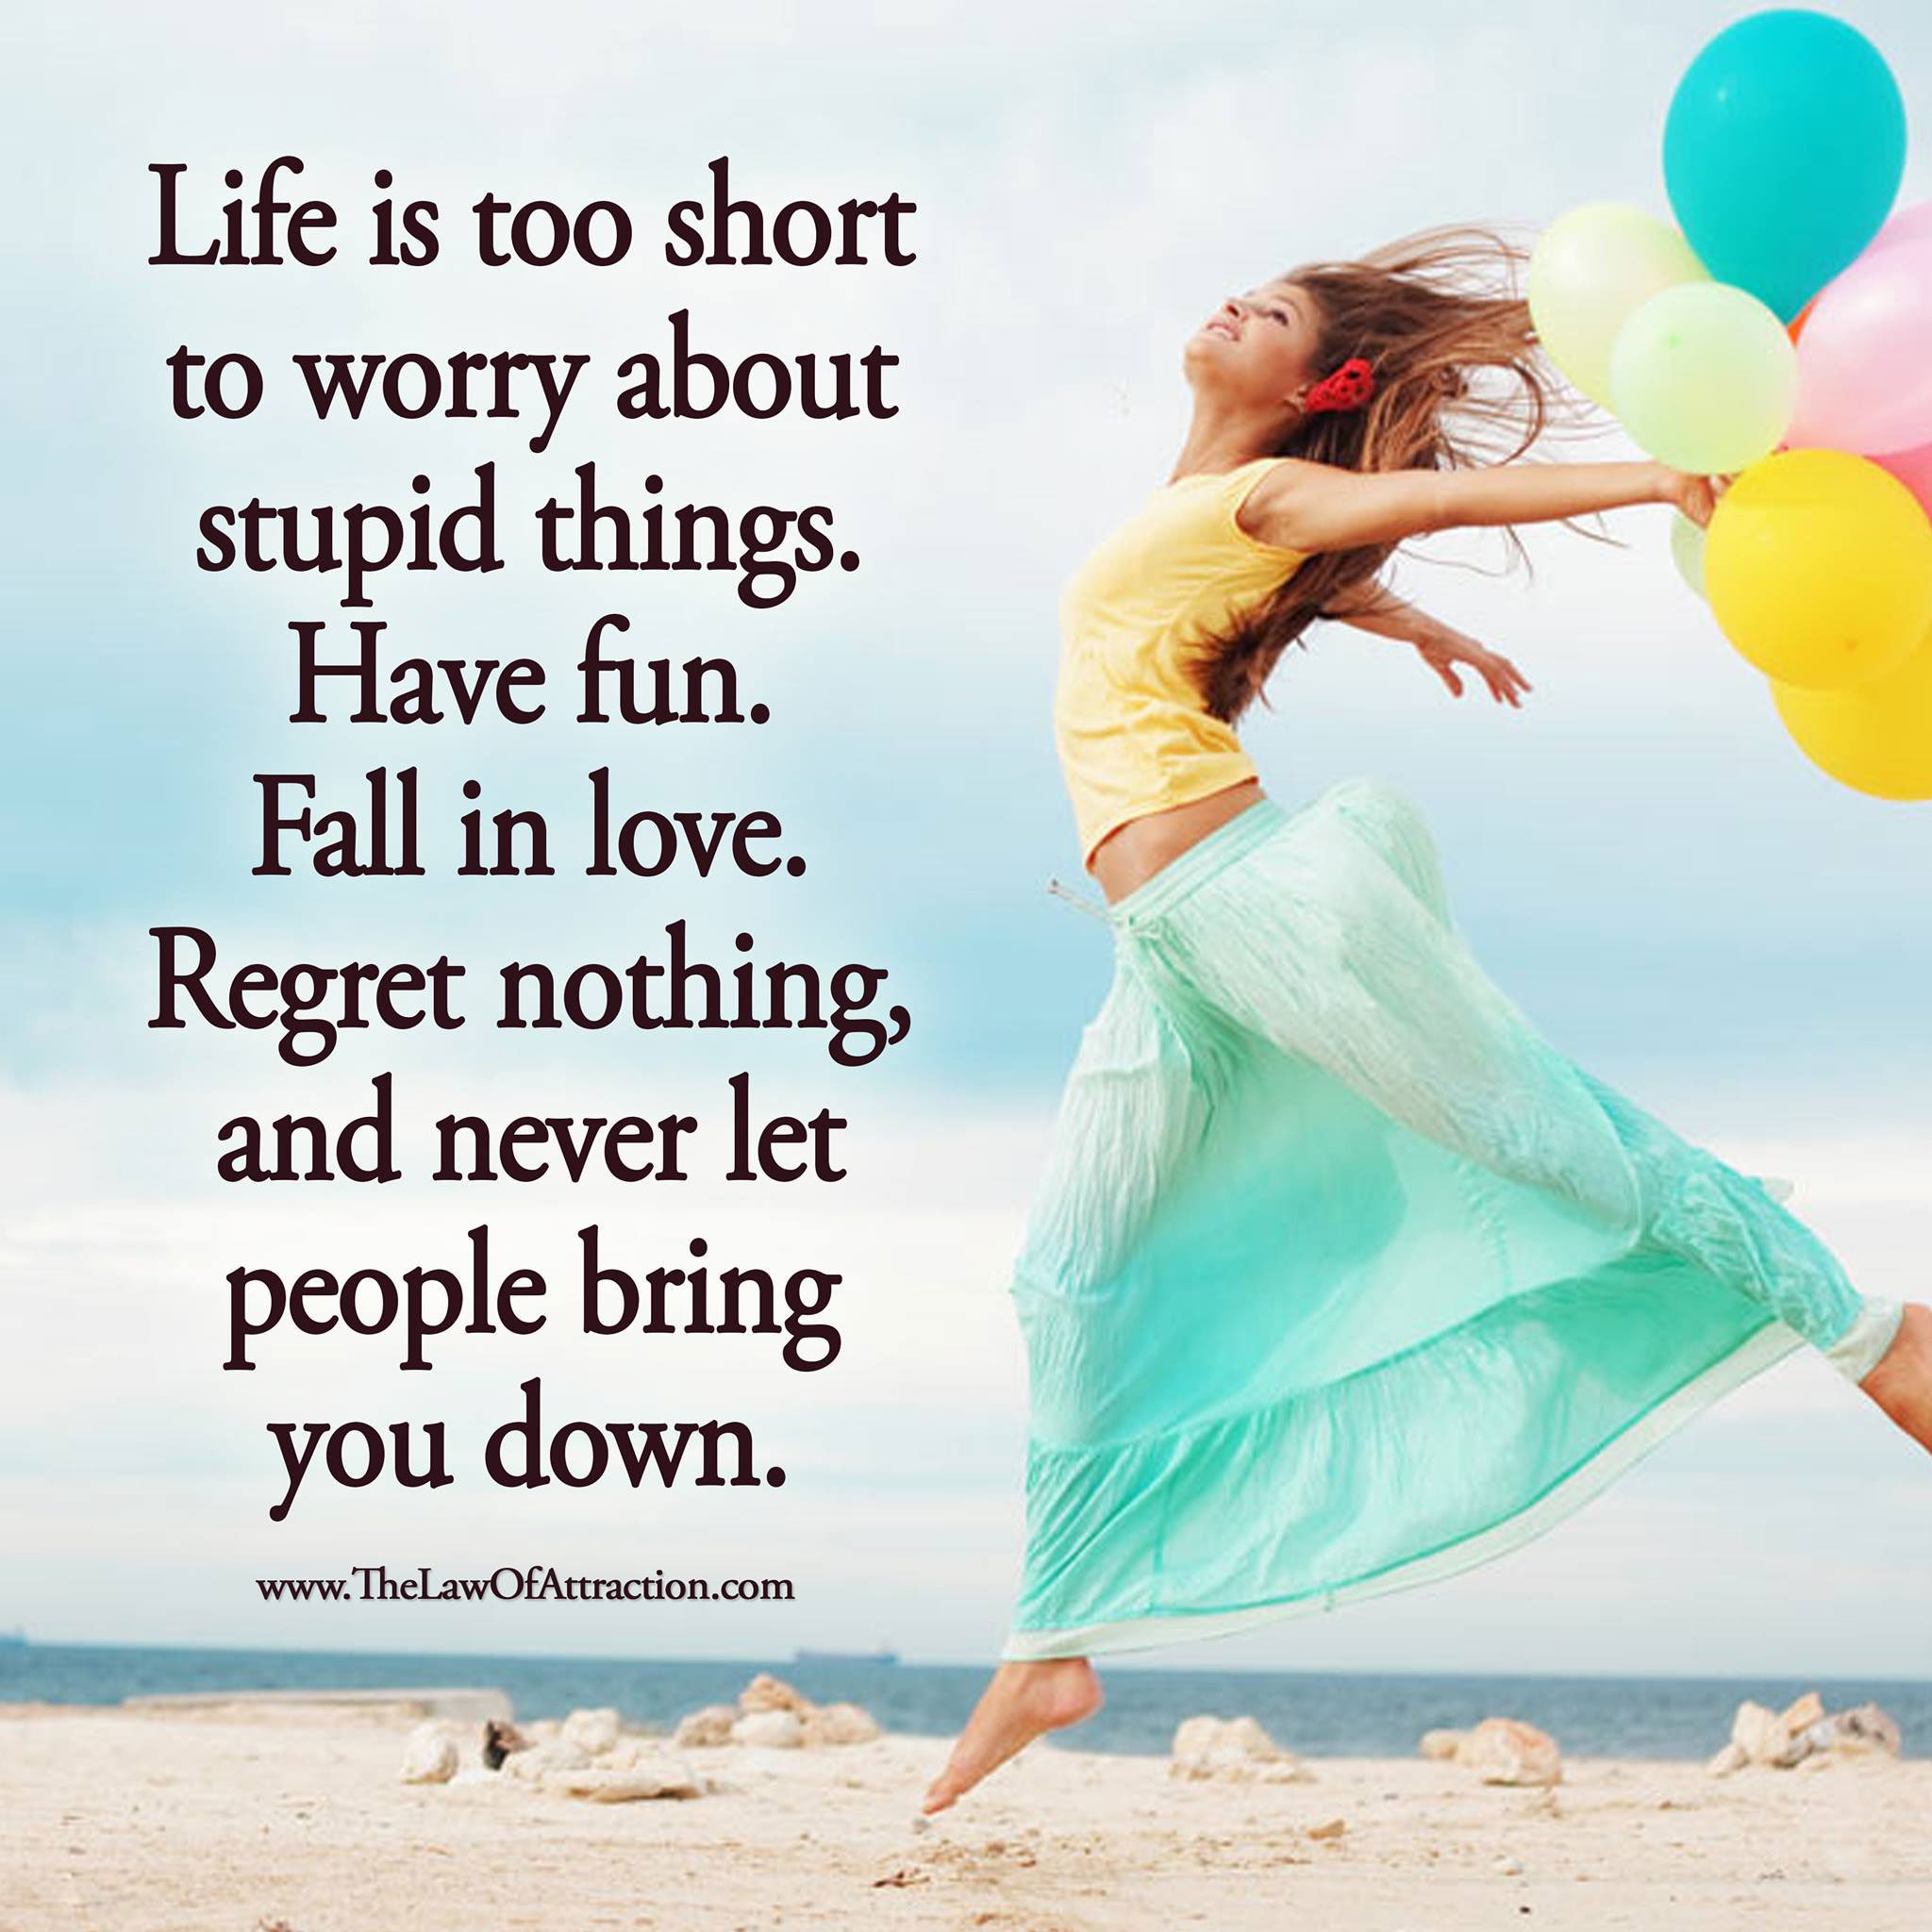 Have fun life. Life is short. Life's too short. Worry и worry about. Life is...too short.